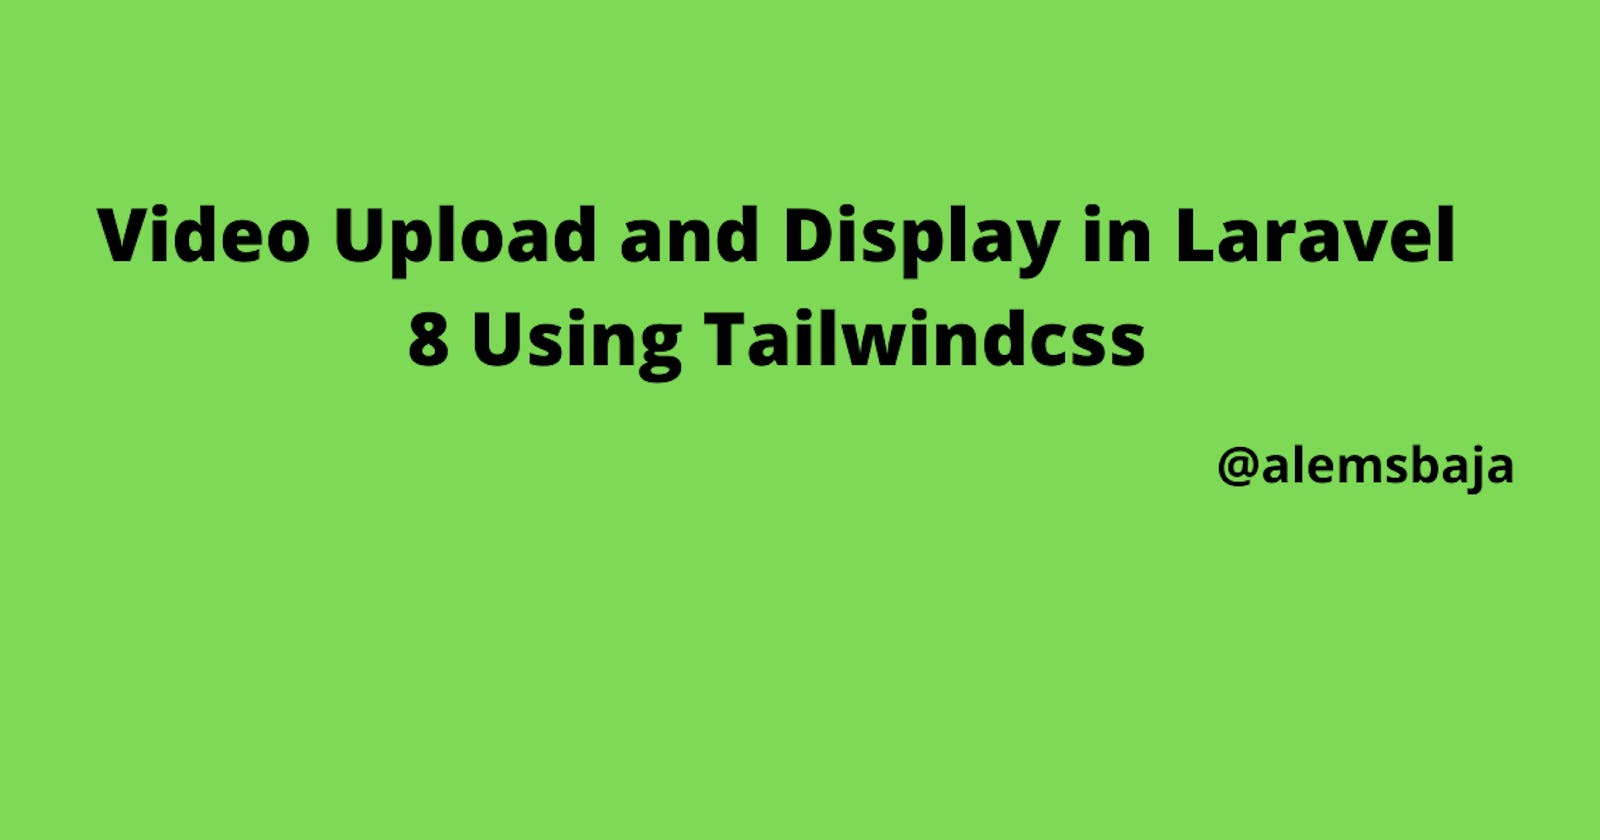 Video Upload and Display in Laravel 8 Using Tailwindcss